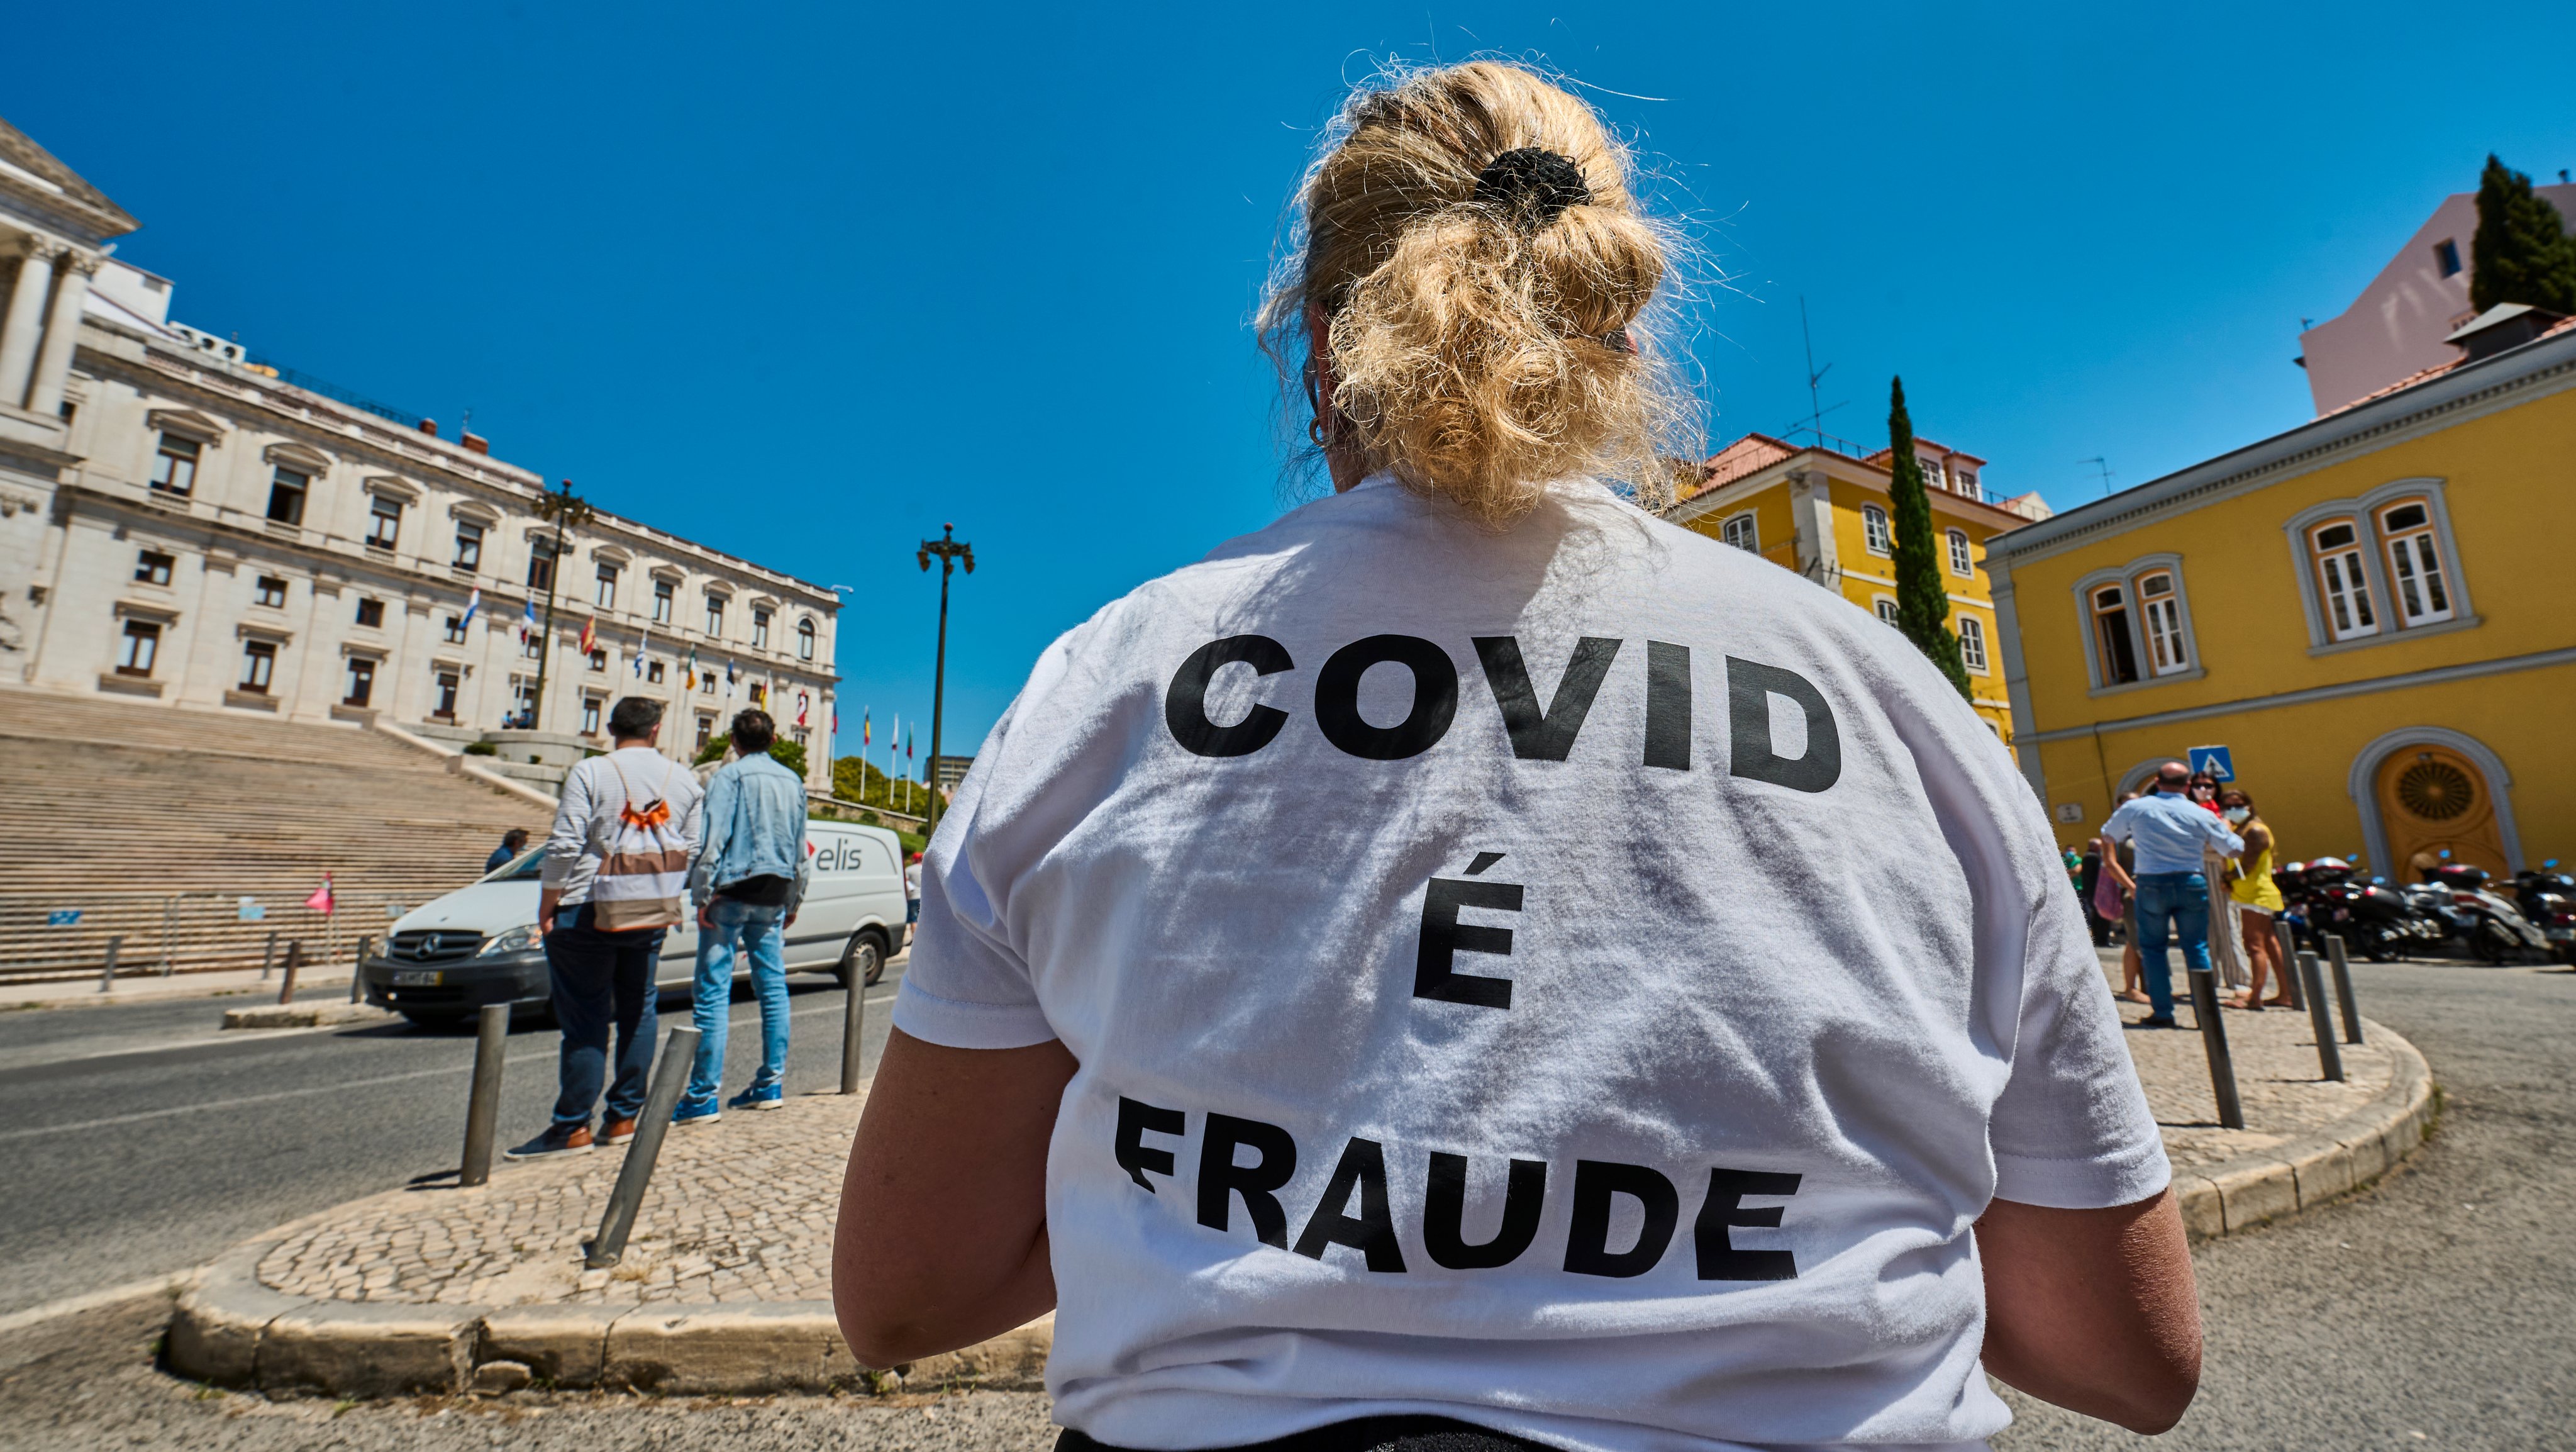 Anti-Vaccine Activists Protest Against Restrictions Imposed By The Government in Portugal